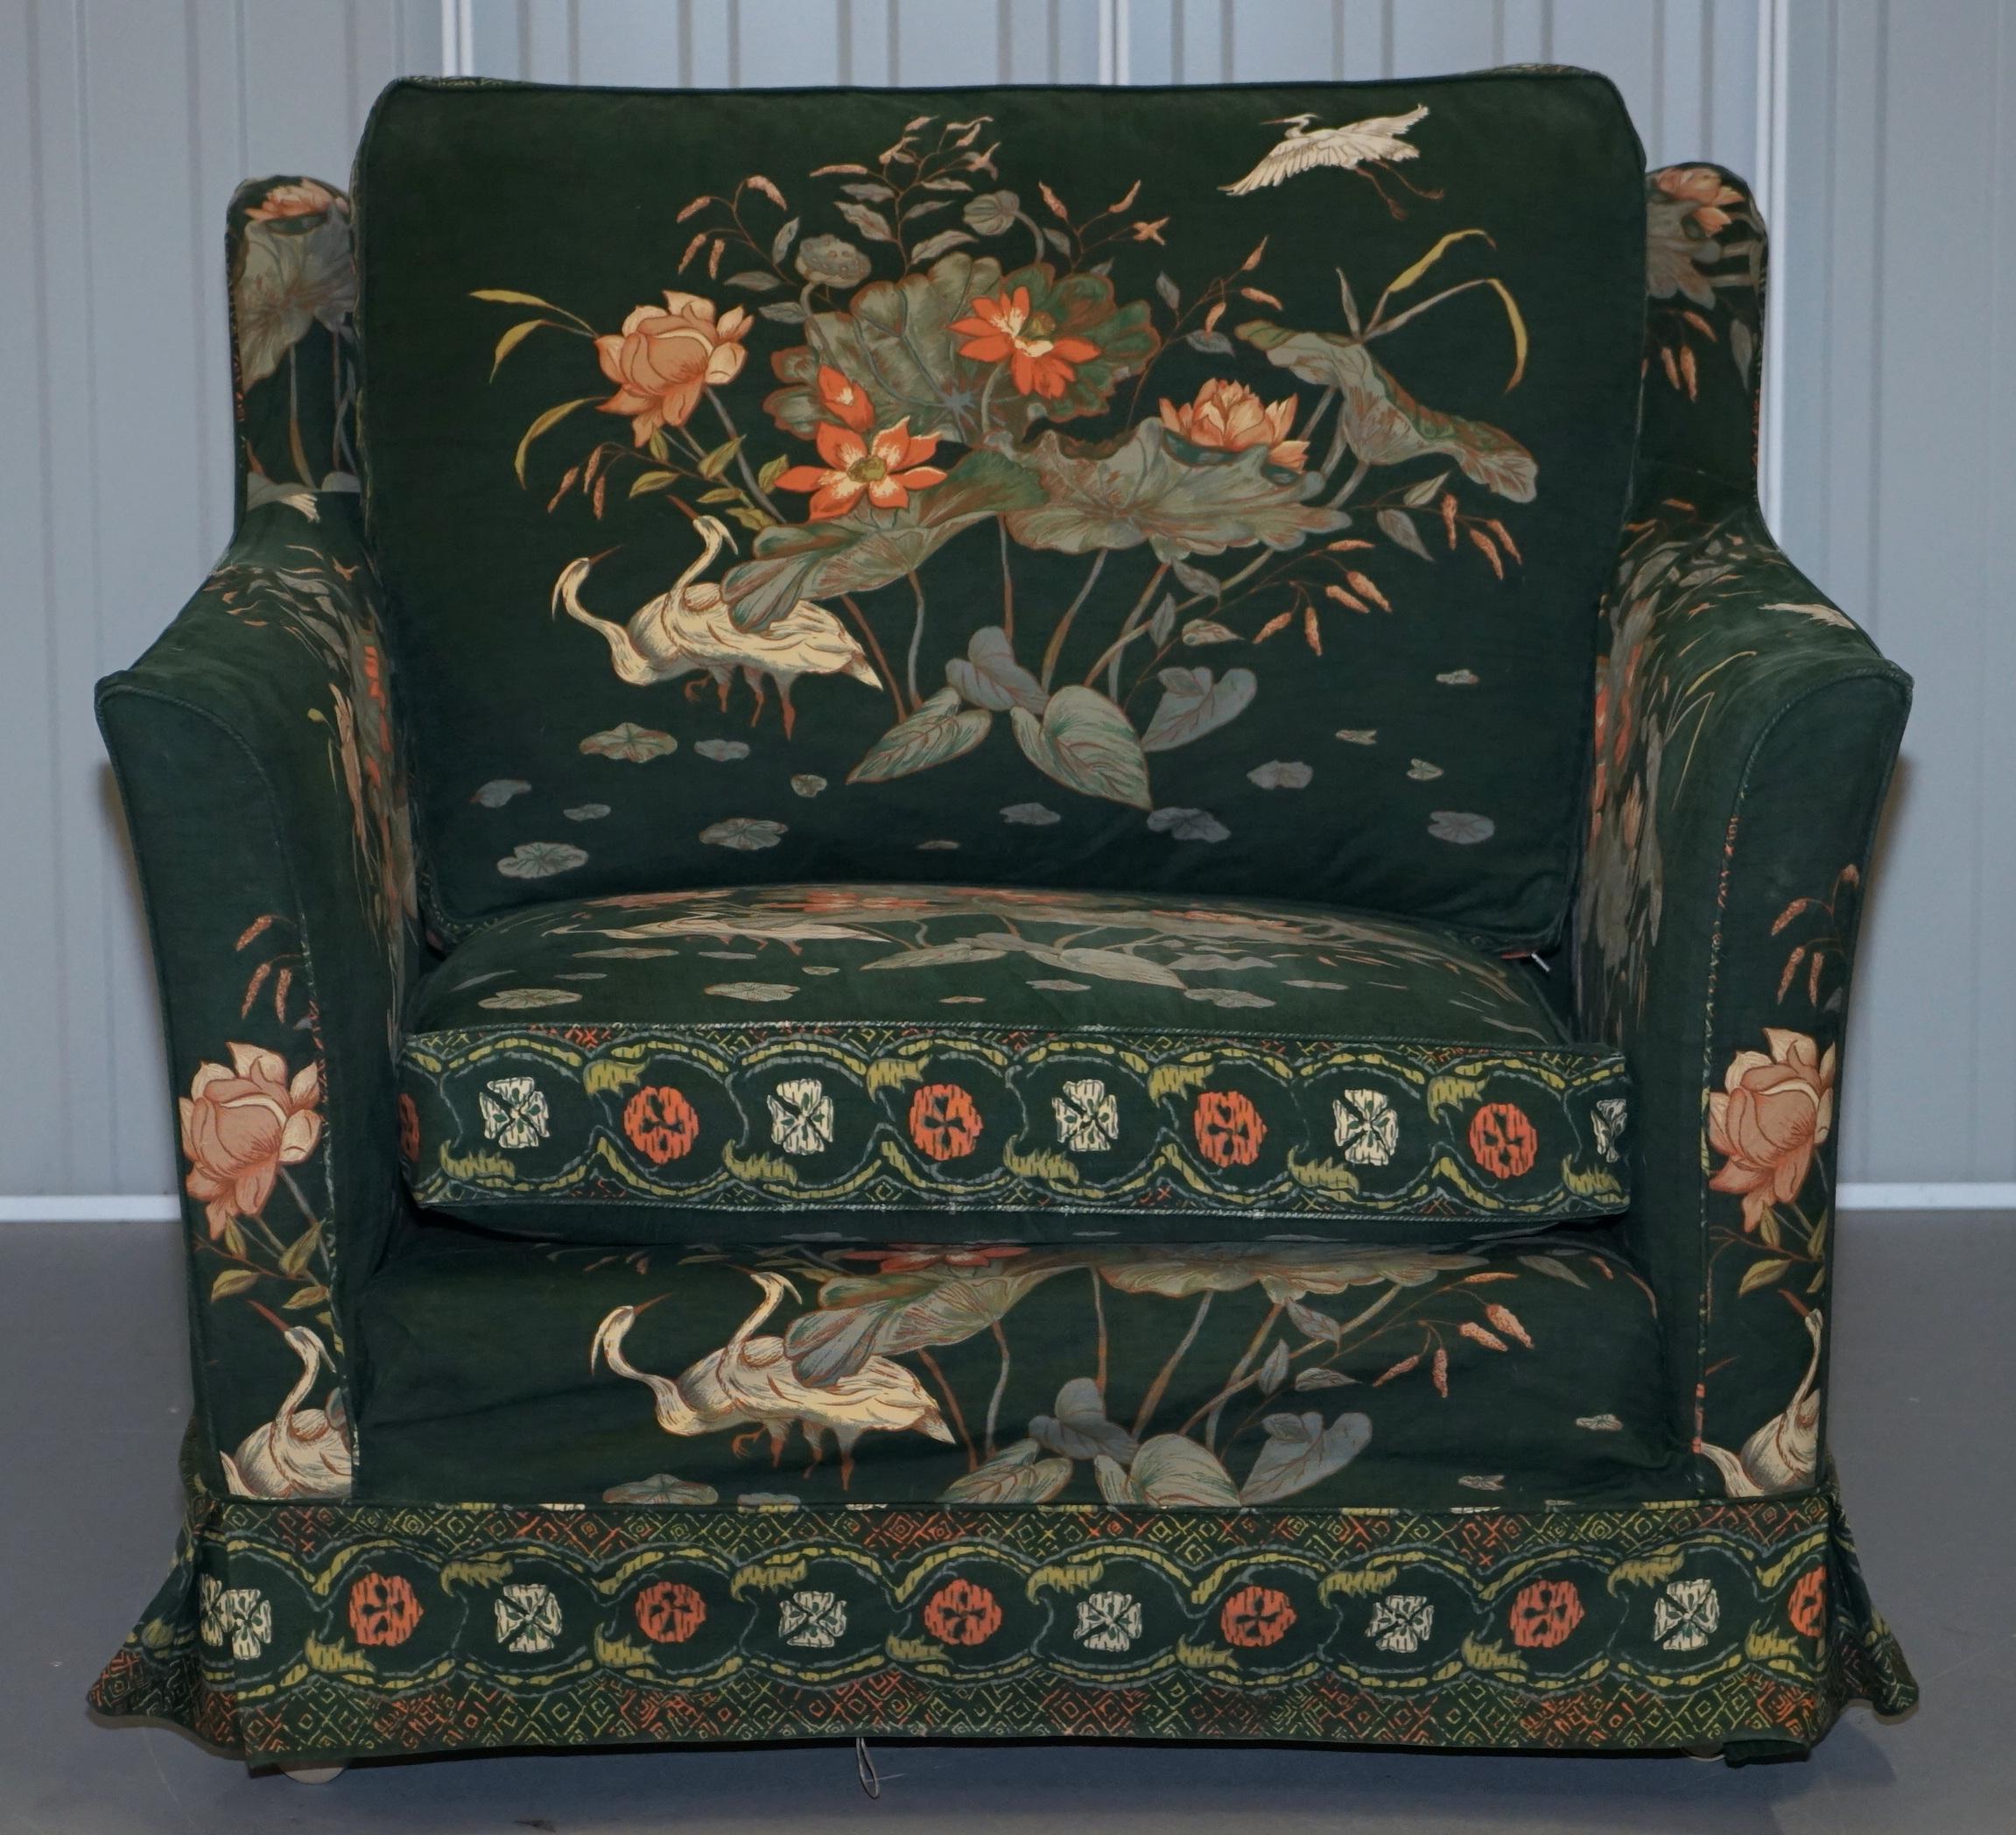 We are delighted to offer for sale this lovely farmhouse country mansion style club armchair with Oriental style floral and bird upholstery

A good looking and very comfortable armchair, the base cushion is feather stuffed, the back cushion is a